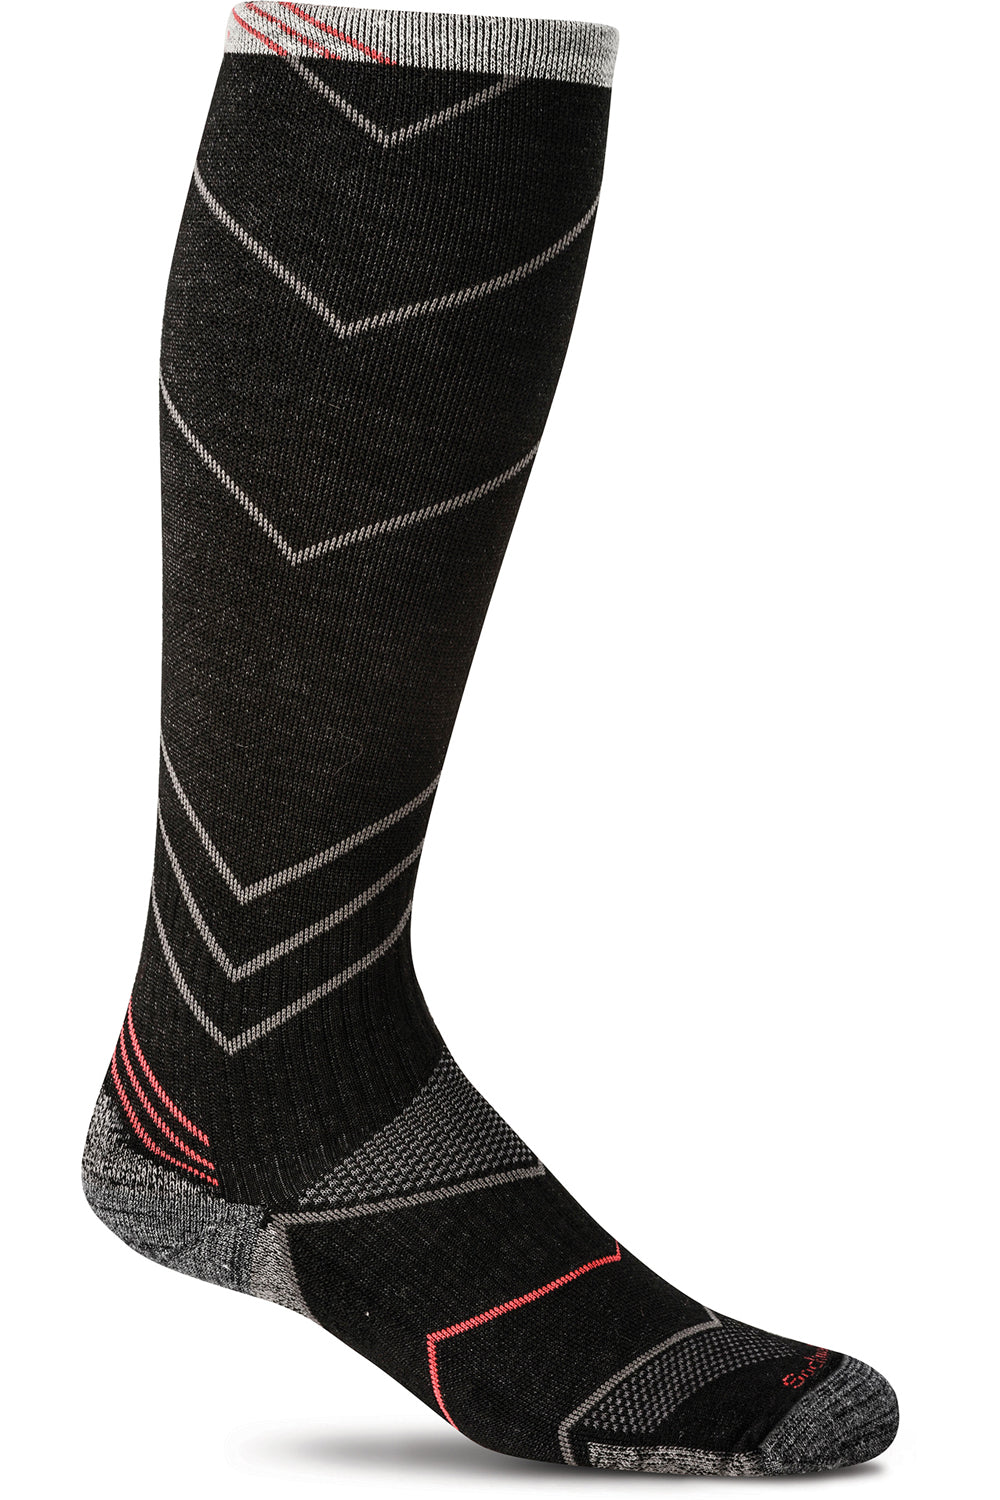 Sockwell Men's Incline Over-The-Calf Moderate Graduated Compression Sock in Black color from the side